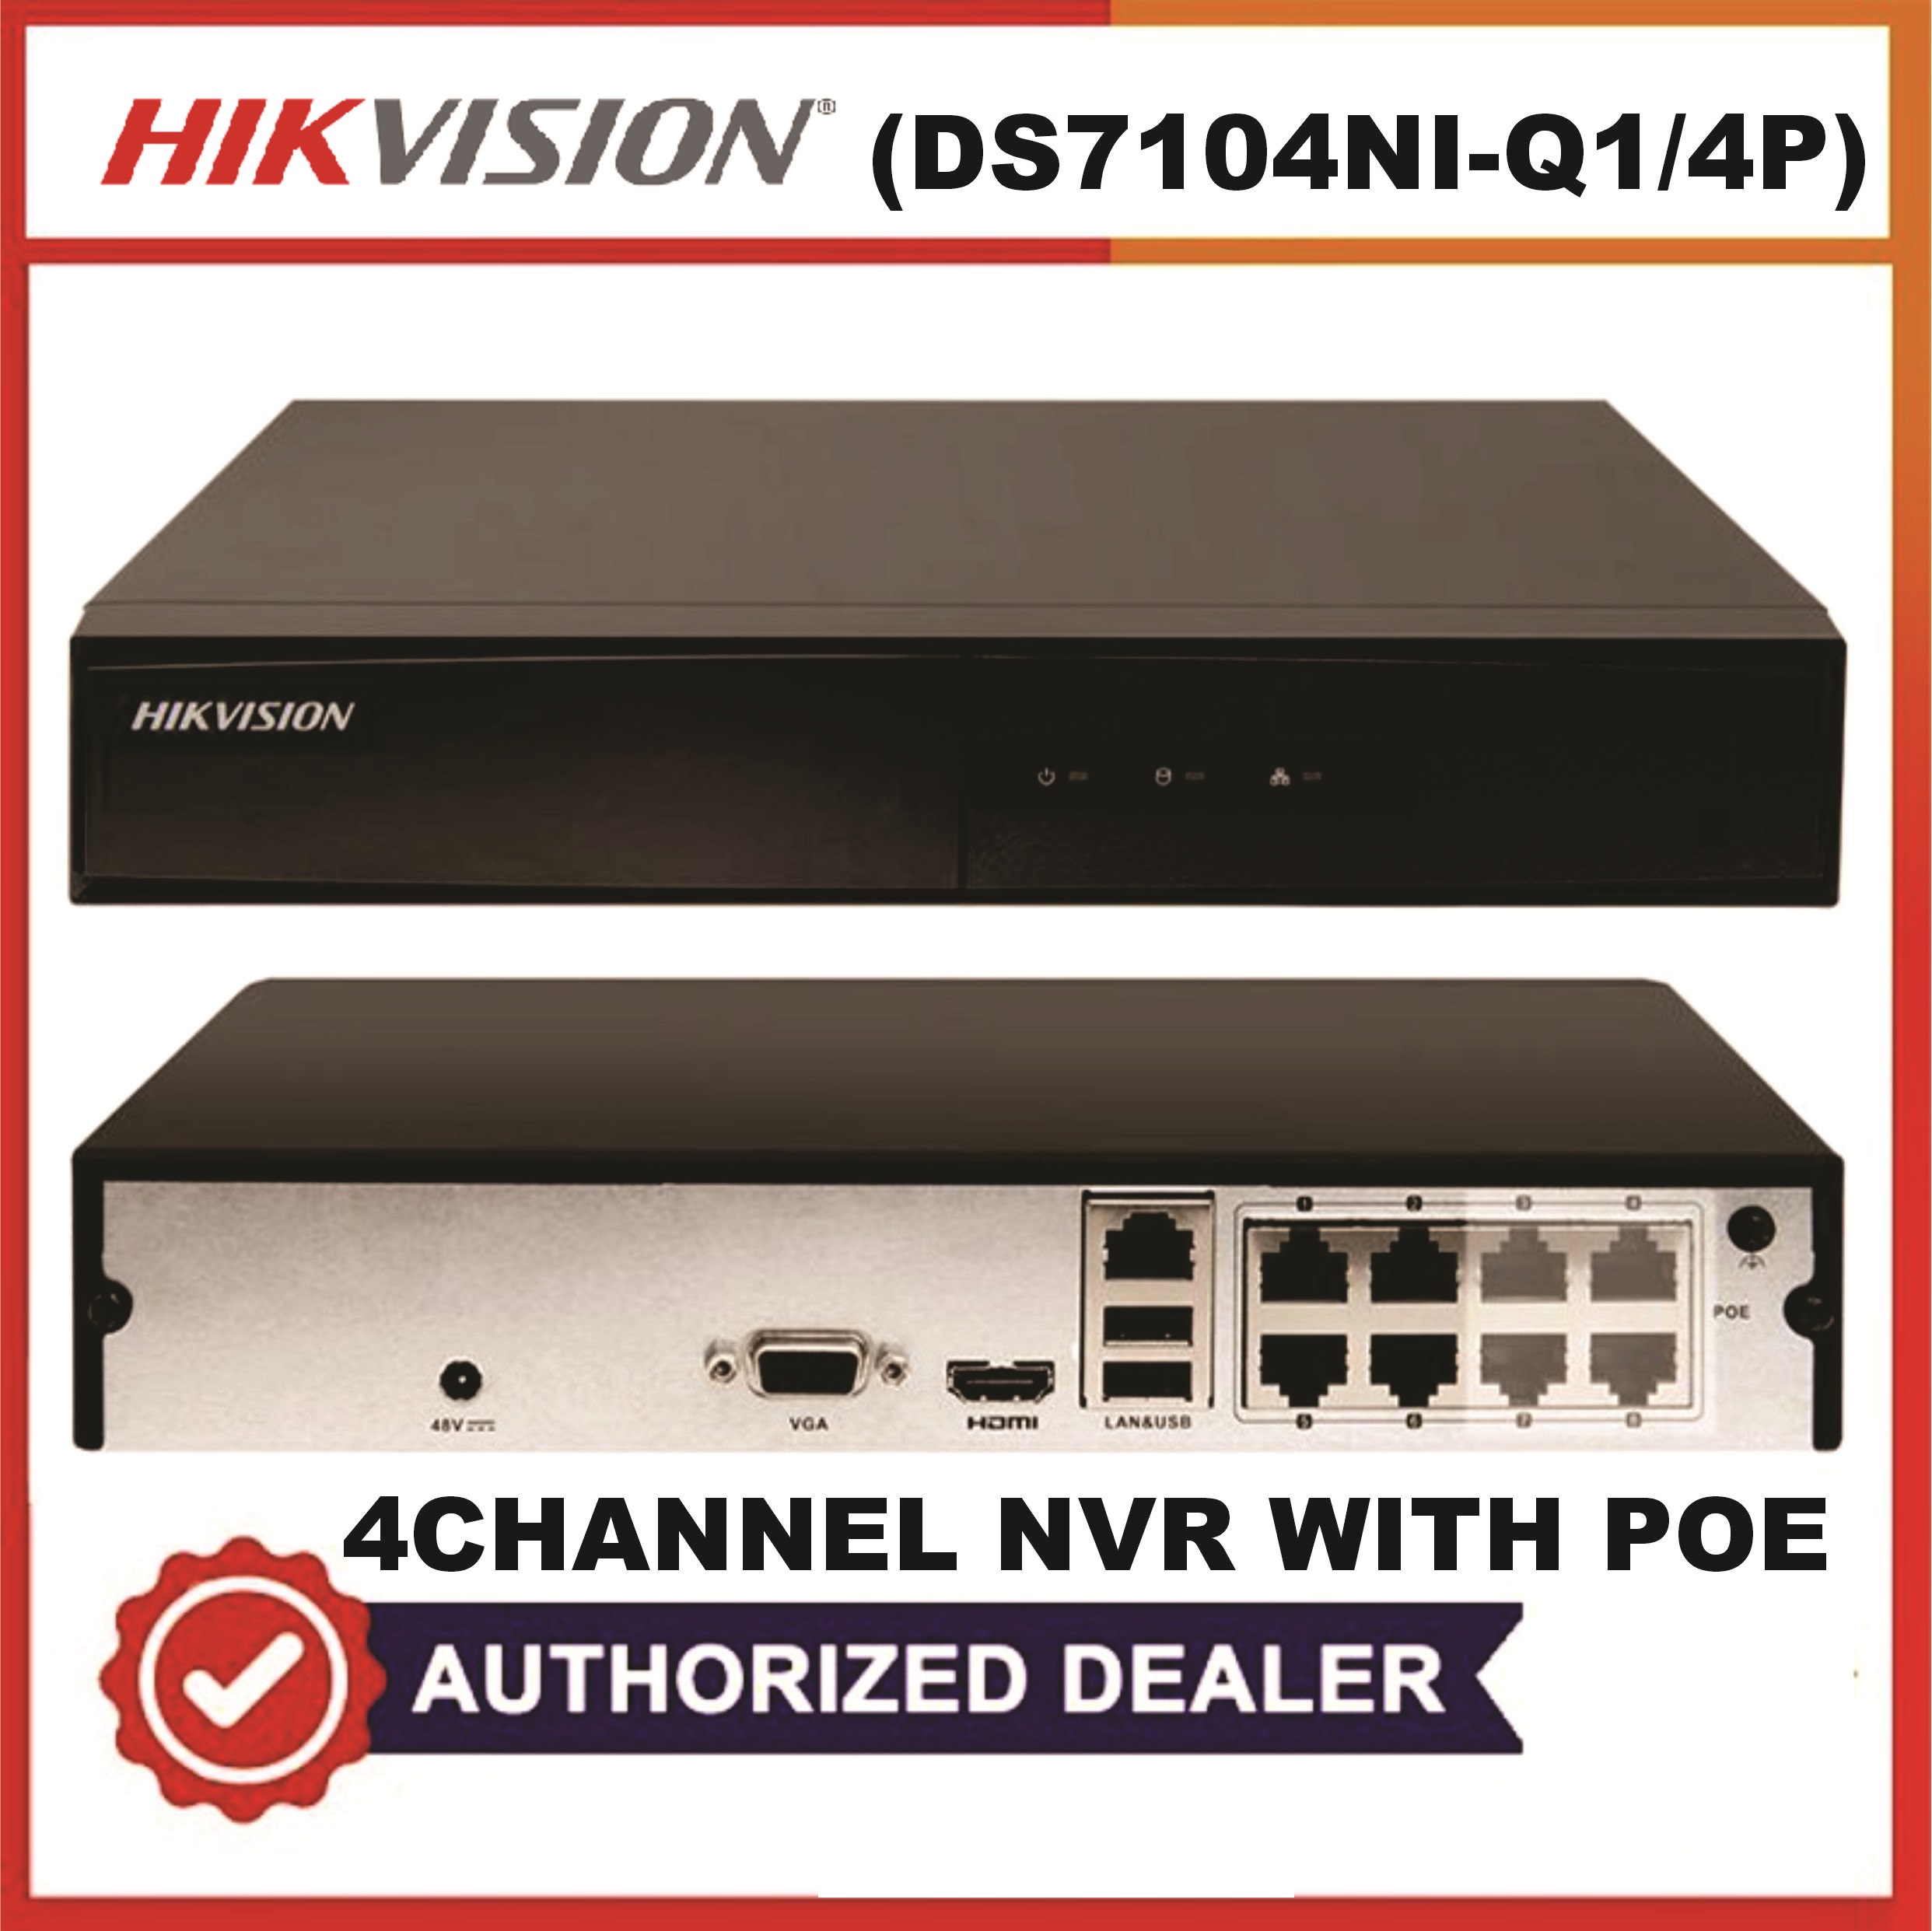 HIKVISION 4 CHANNEL 4P NVR-7600 4MP (DS7604NI-QI/4P)